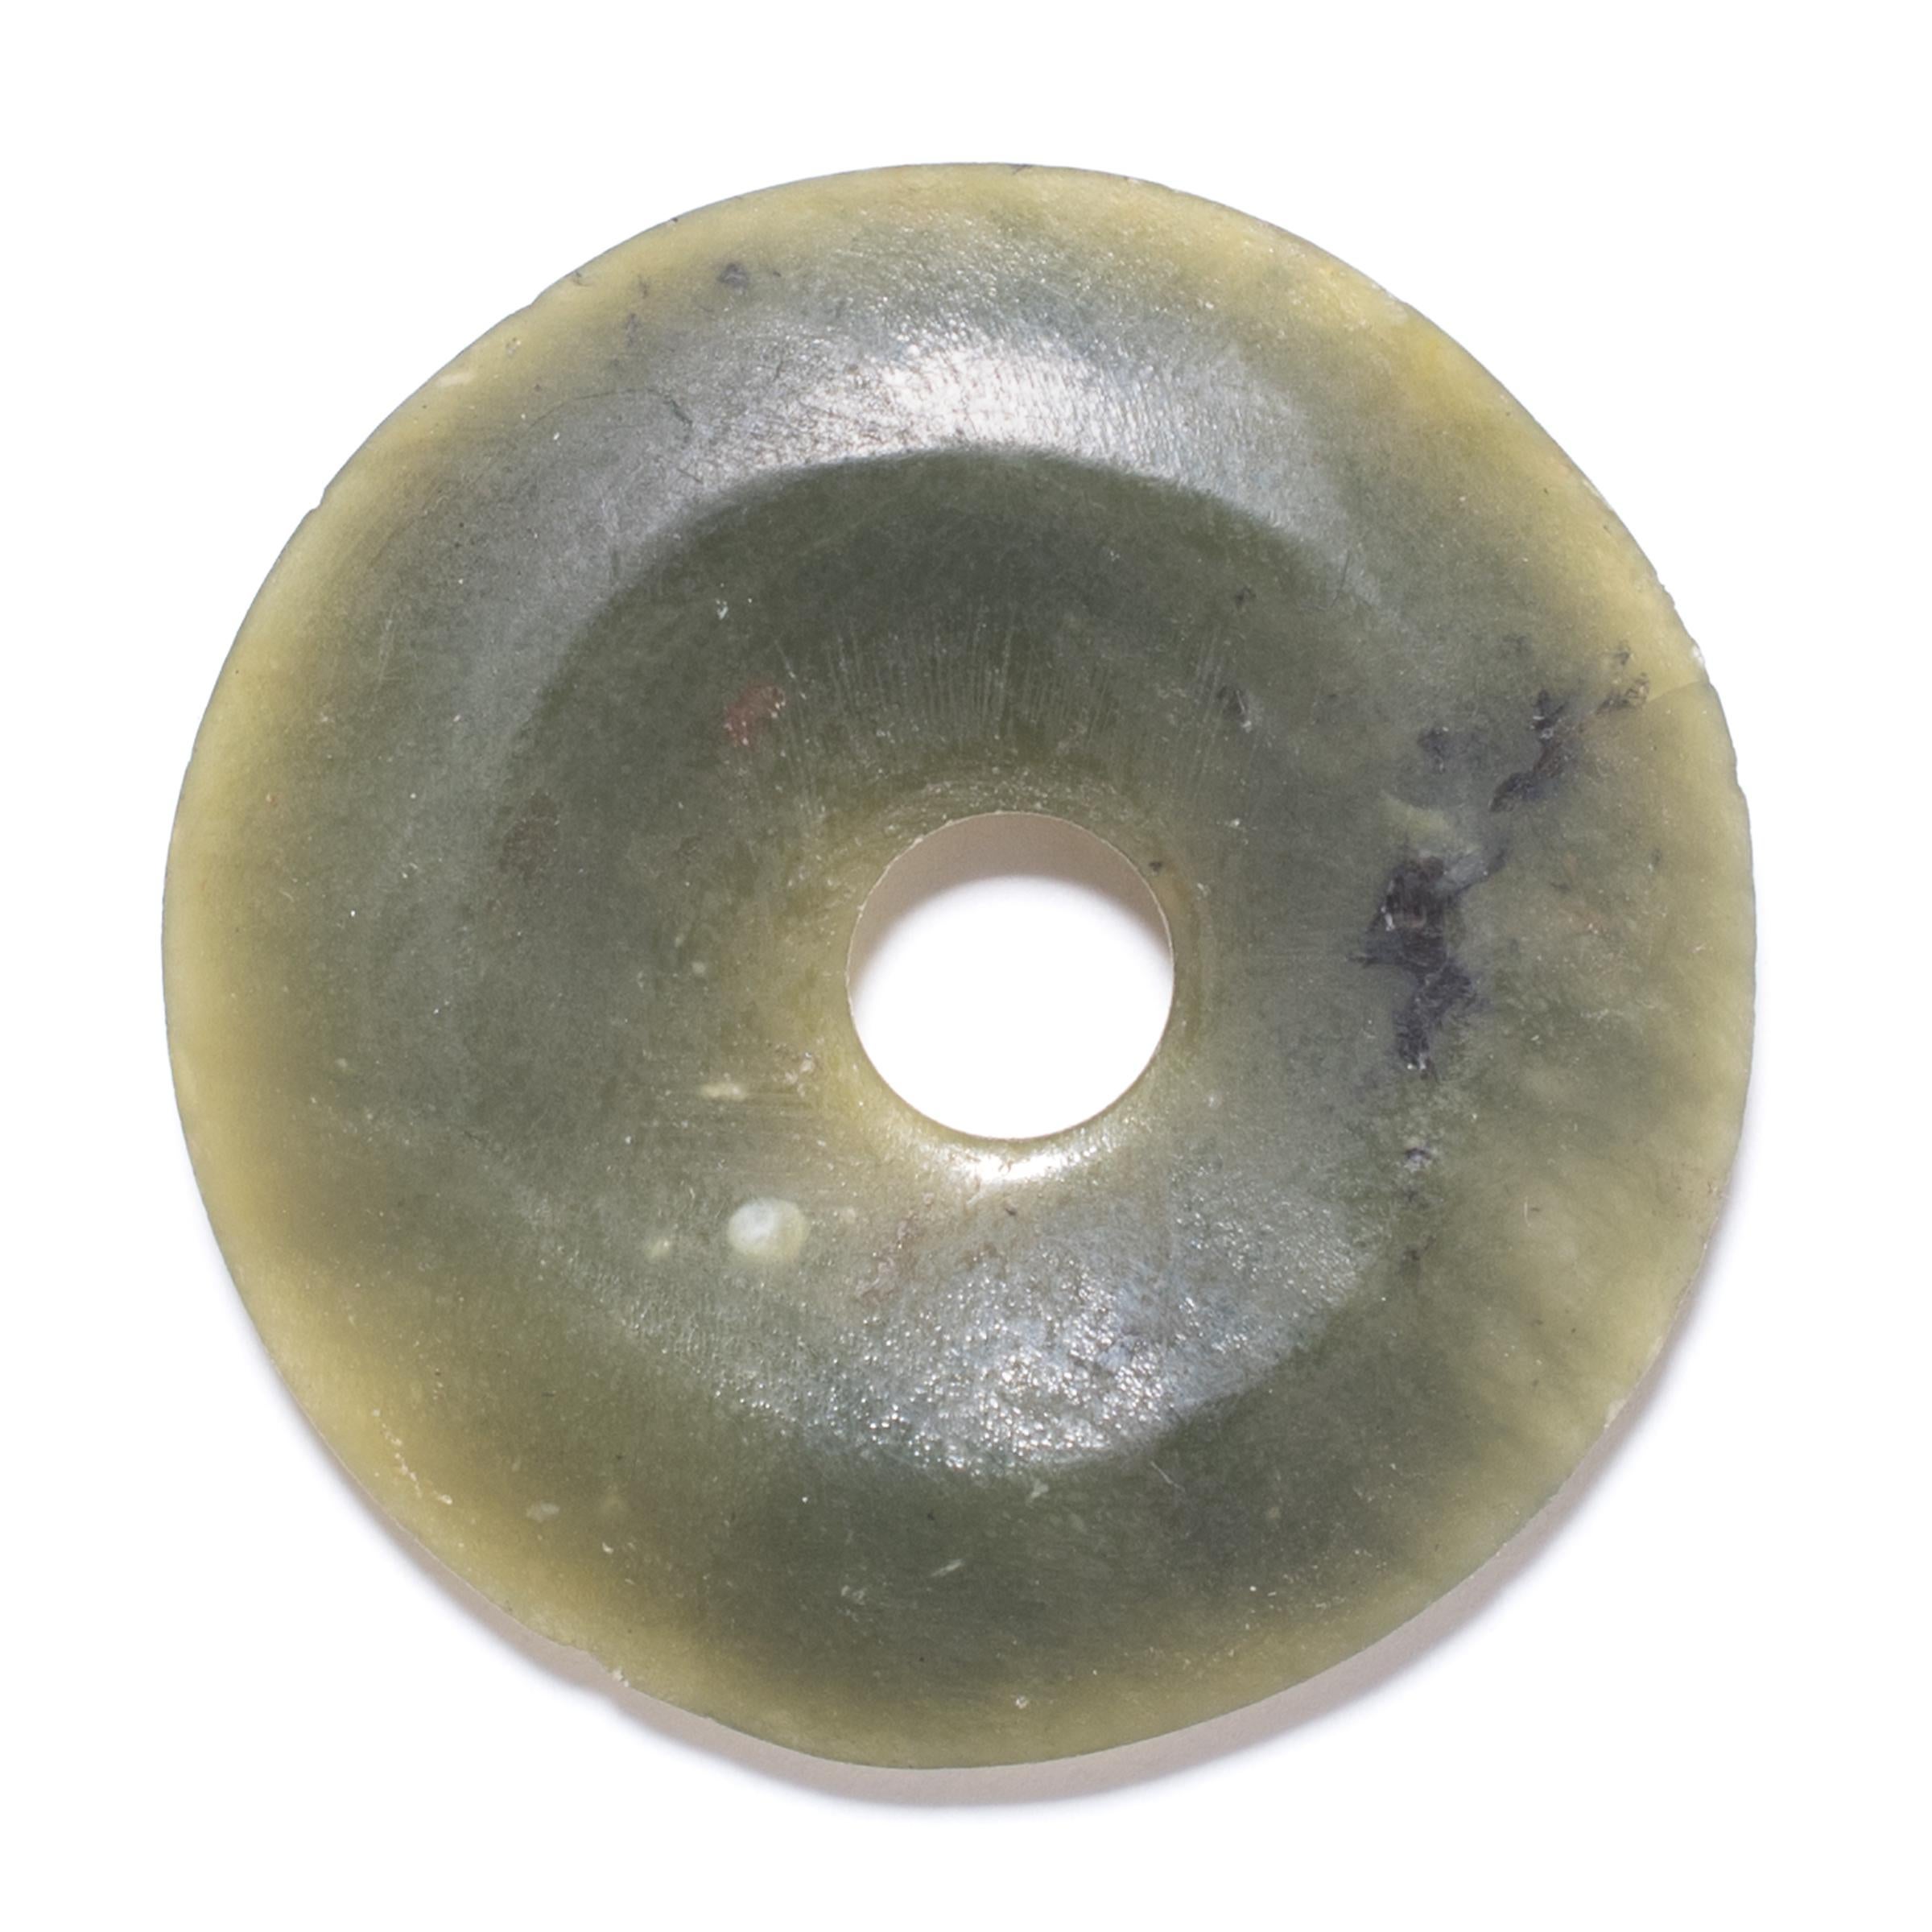 Bi discs have been found in the tomcbs of ancient Chinese emperors and aristocrats, although their function and significance remain unknown. Shaping this hard stone takes considerable skill. An artisan patiently rubs the surface with sand to give